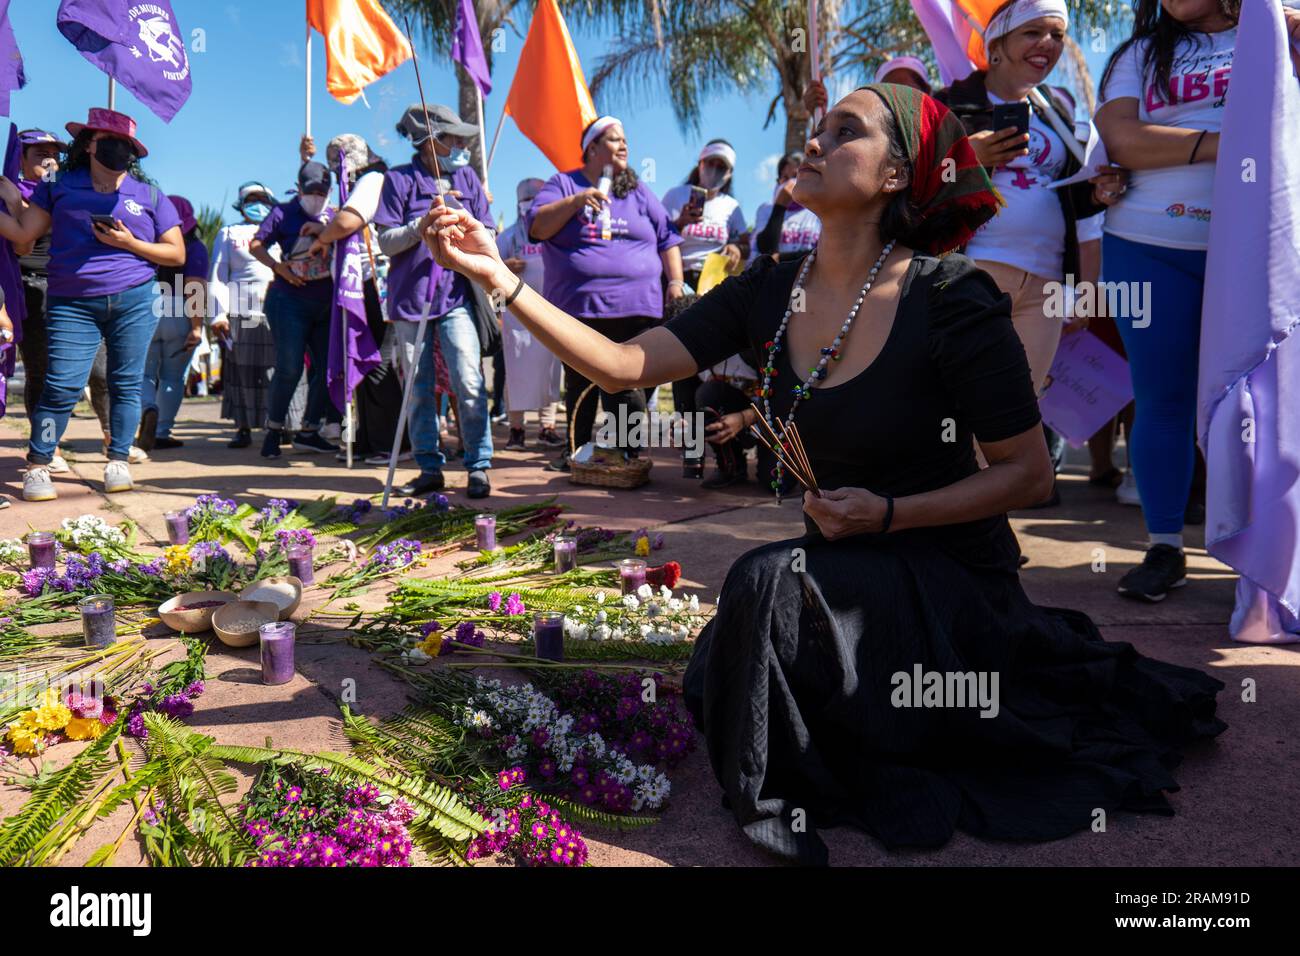 Tegucigalpa, Francisco Morazan, Honduras - December 11, 2022: Woman with Colorful Scarf Lights Incense and Prepares an Offering for the International Stock Photo